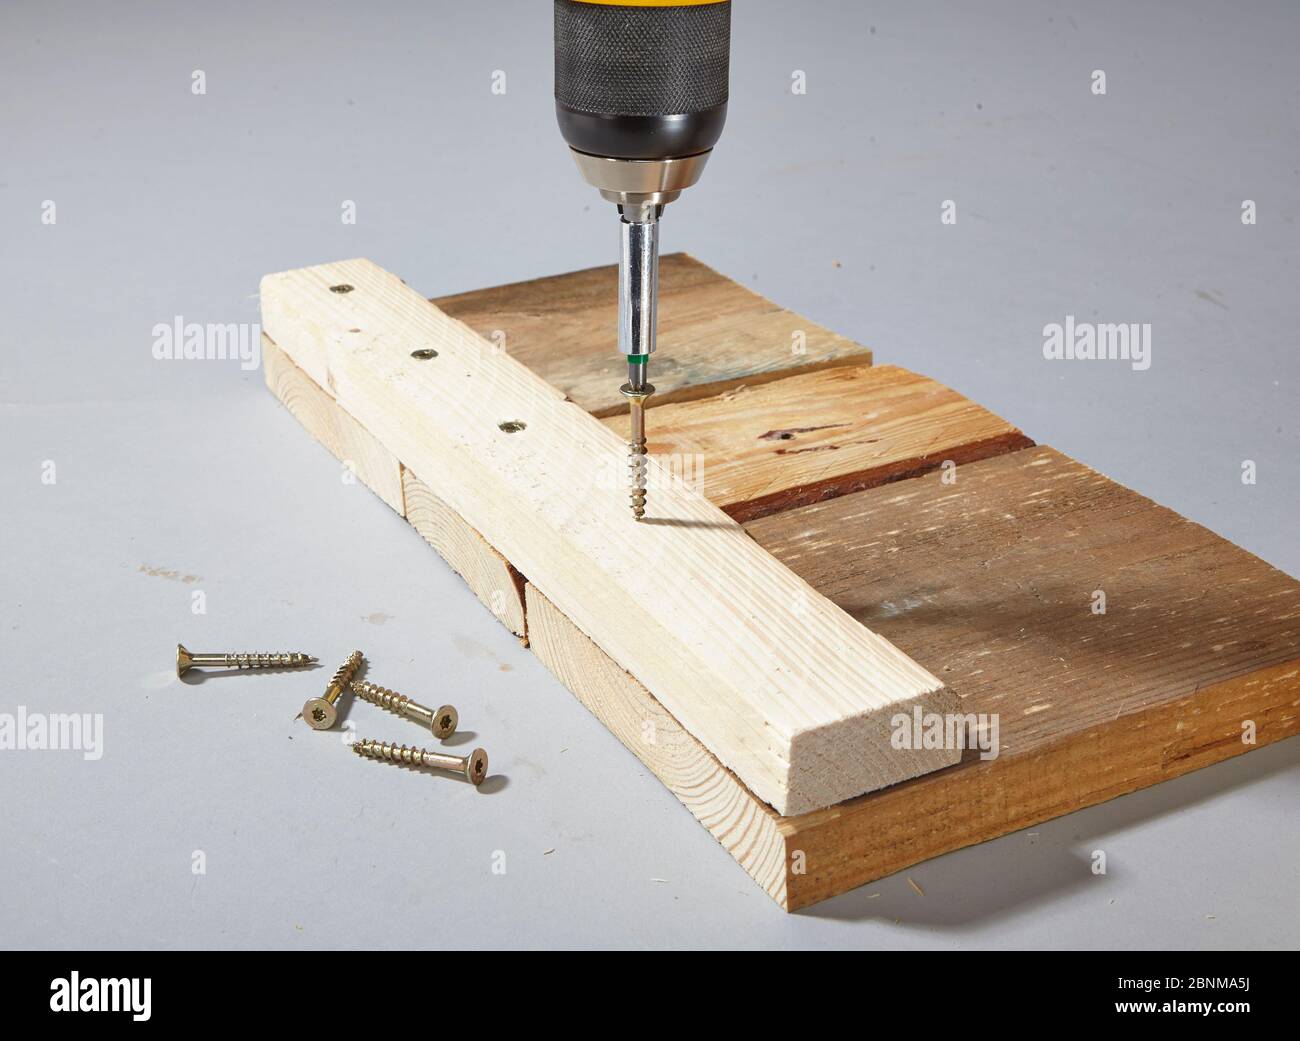 Construction of a shelf made of wood, Euro pallet, solid wood, MDF board; Do-it-yourself production, step-by-step, step 4 Connect the individual boards with wooden strips and screws Stock Photo